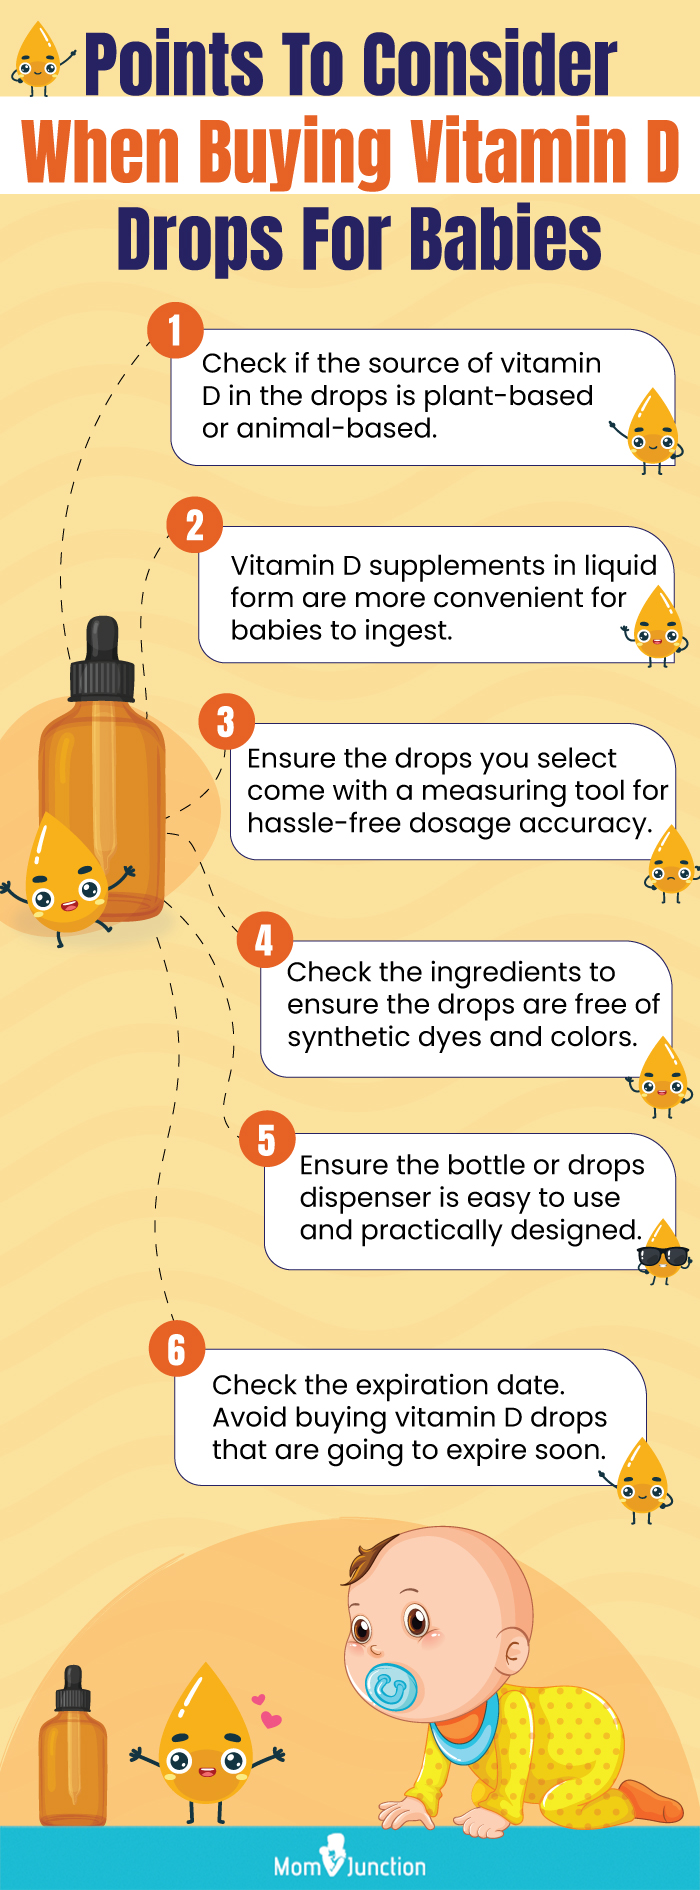 Points To Consider When Buying Vitamin D-Drops For Babies (infographic)